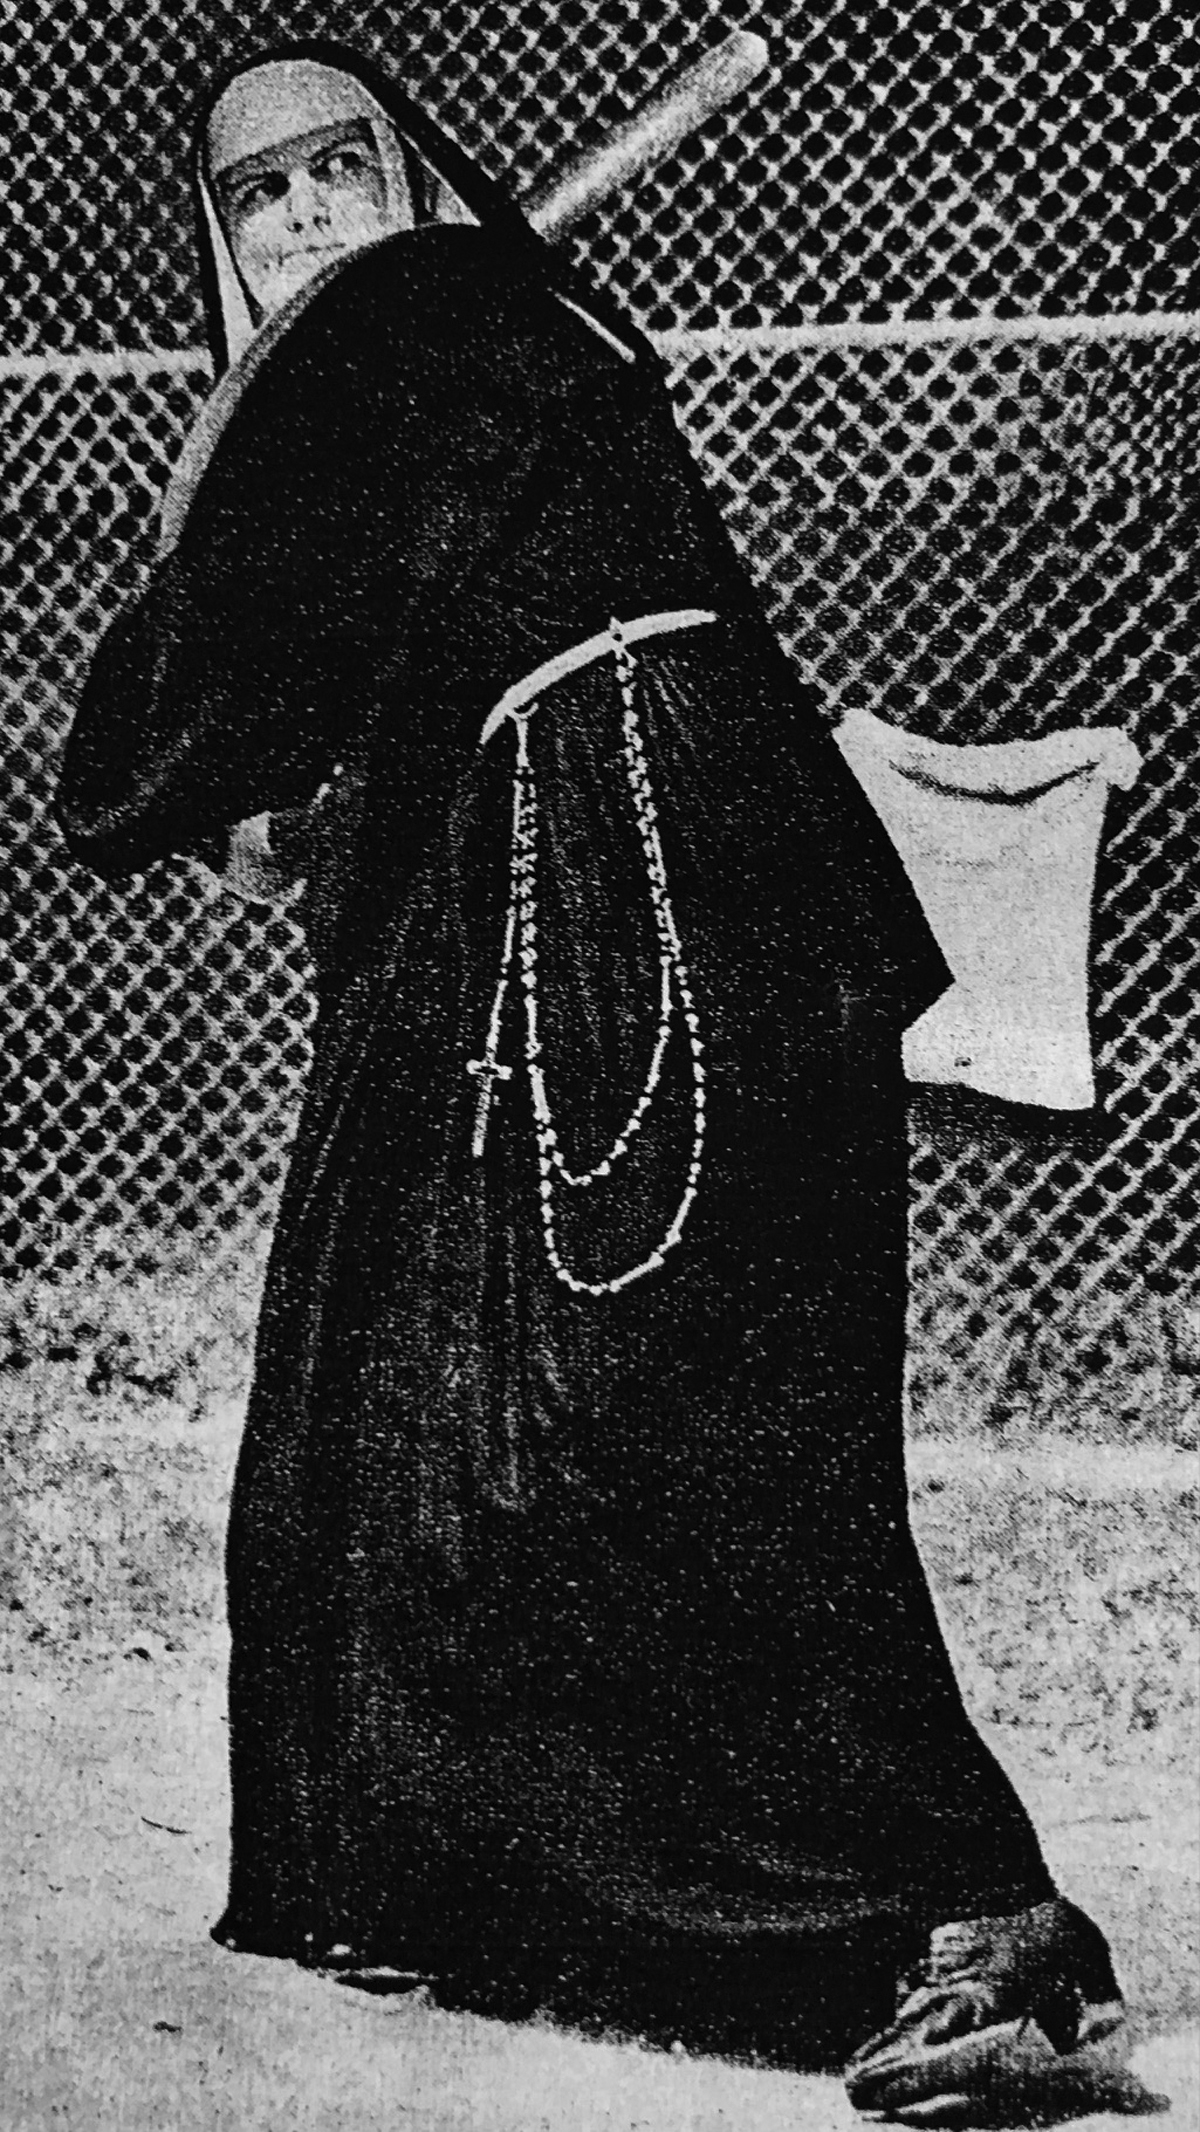 SISTER-MARY-LAWRENCE-1953